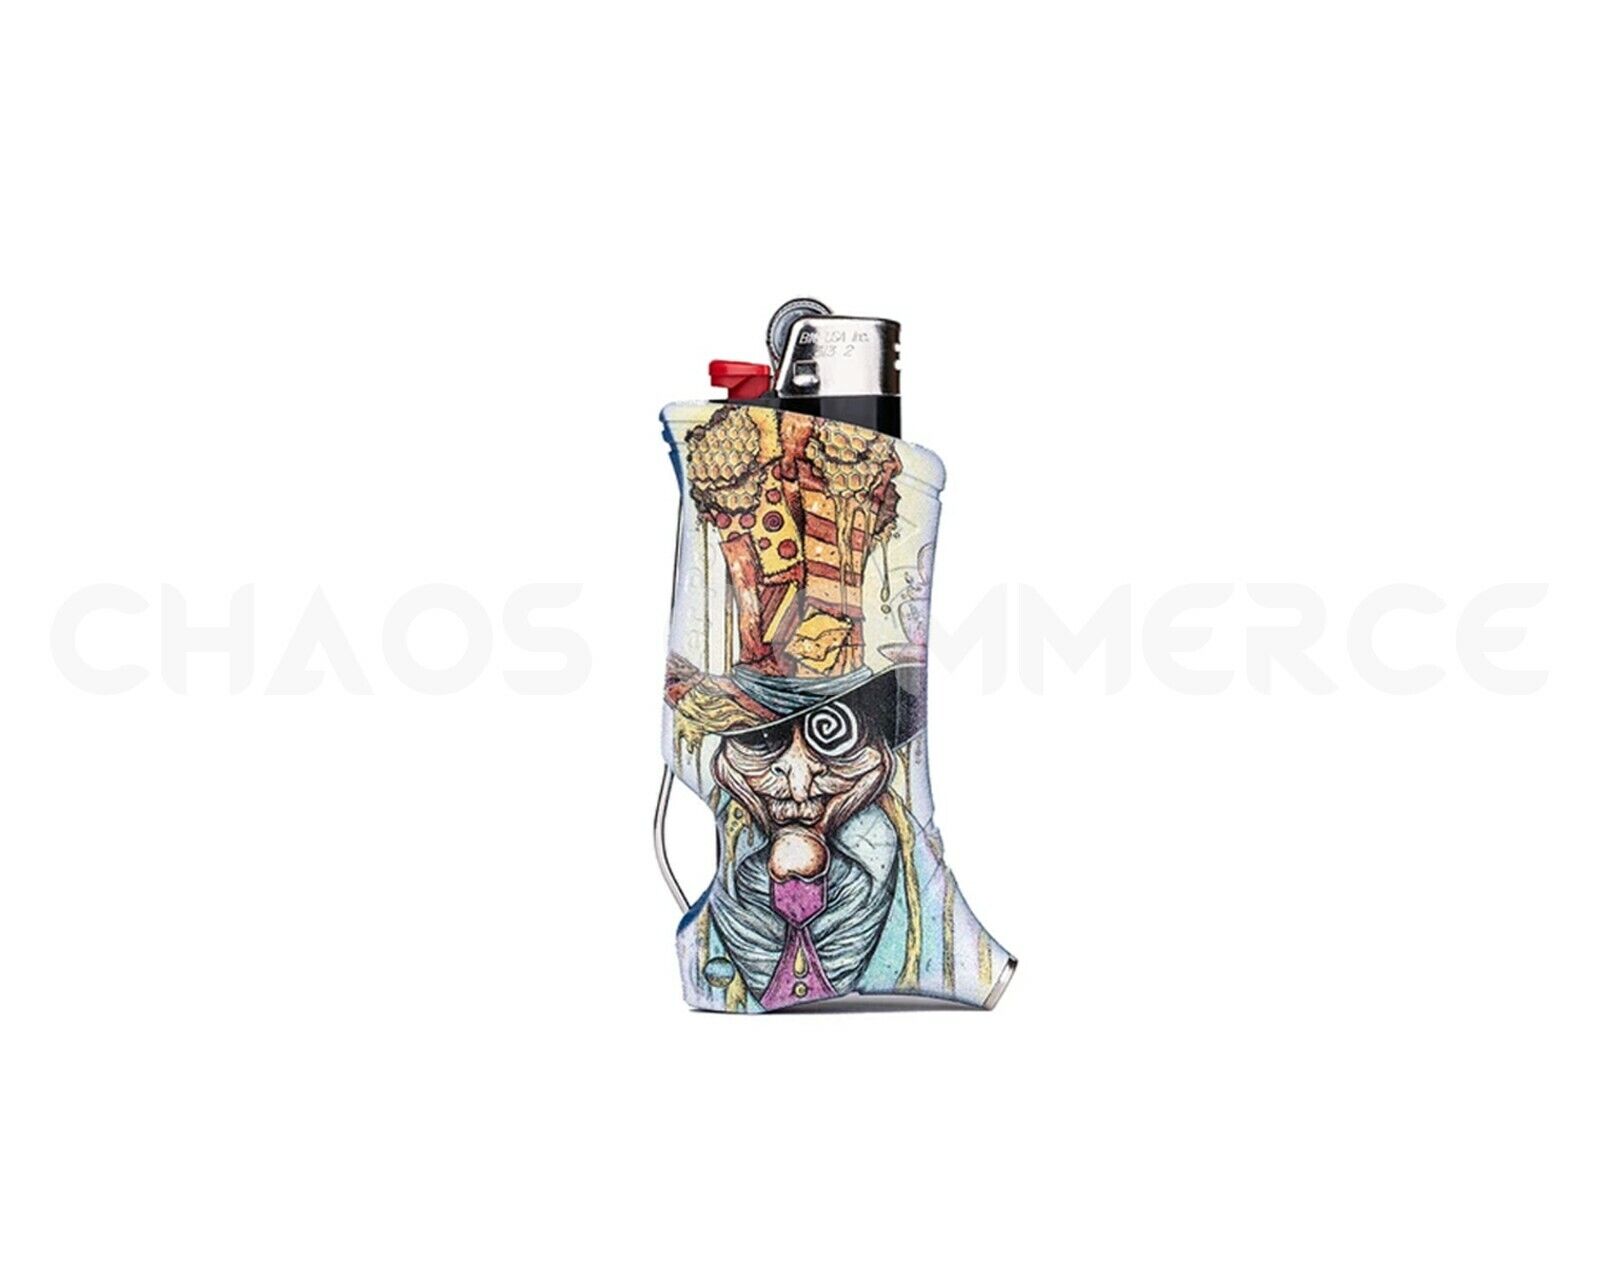 Toker Poker Lighter Sleeve and Tool - Alice in Wonderland Collection